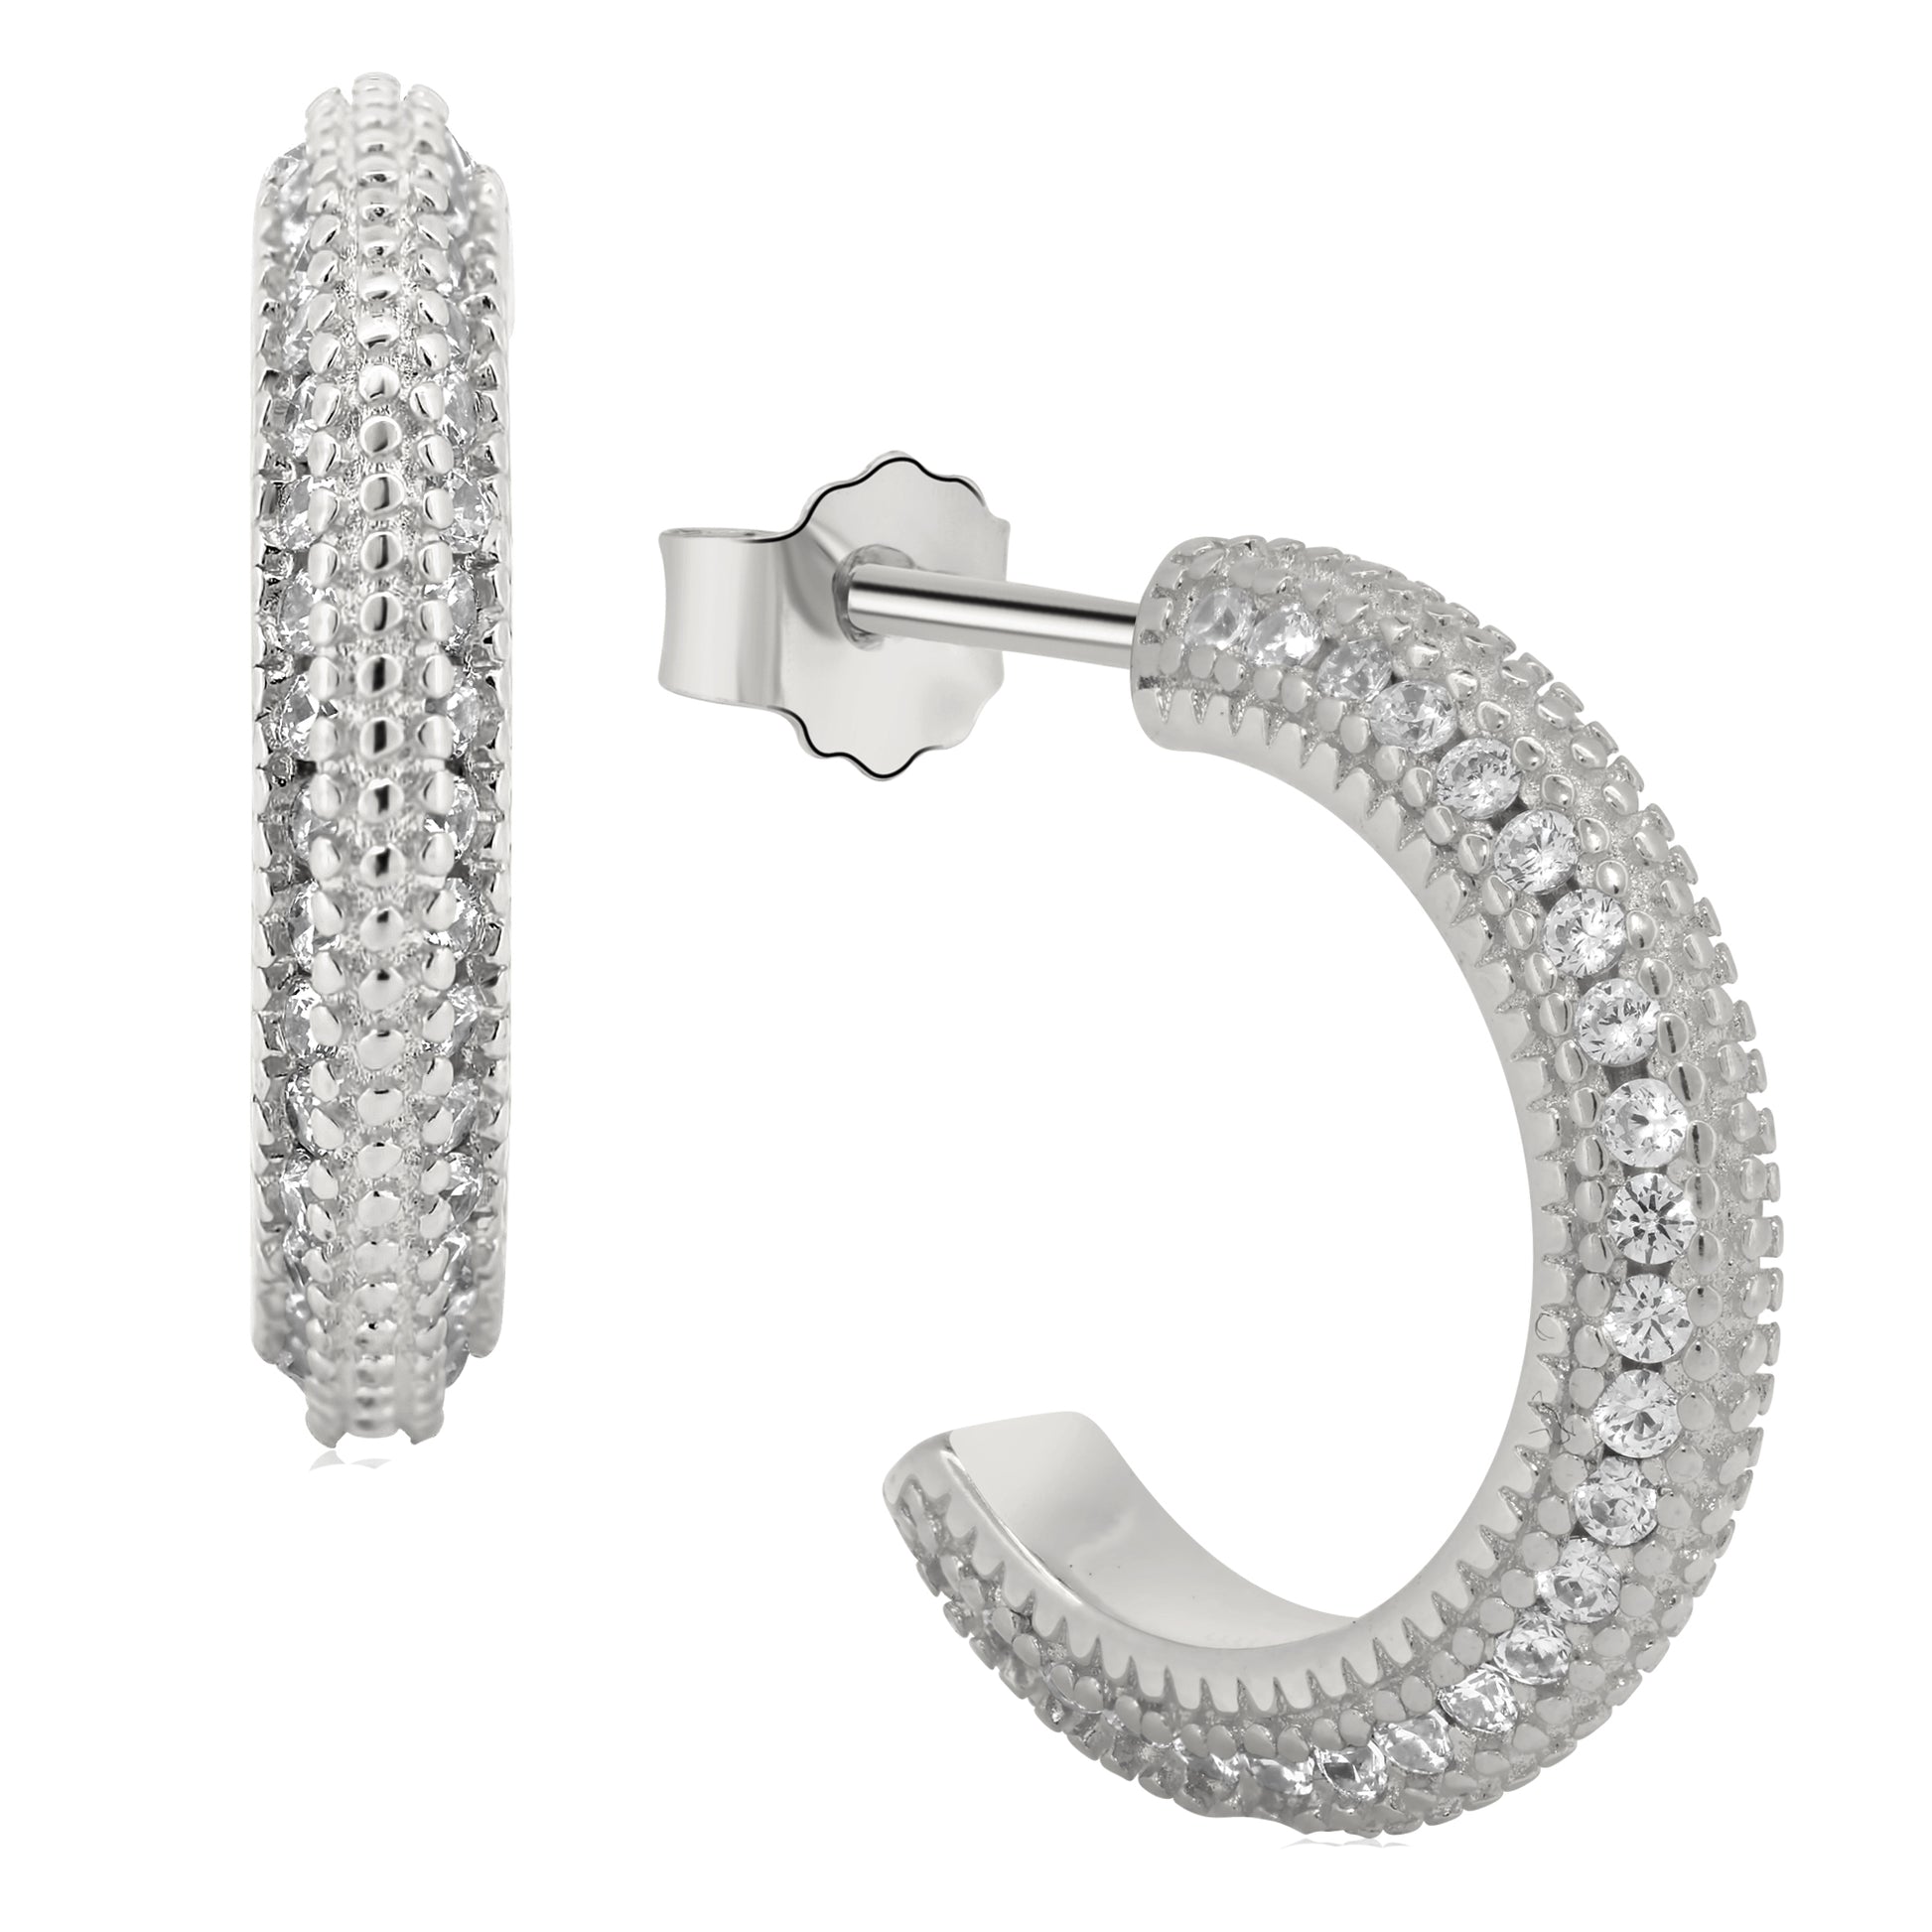 925 Silver Hoop Earrings with CZ Side Detail, Push Backing, Statement Jewelry